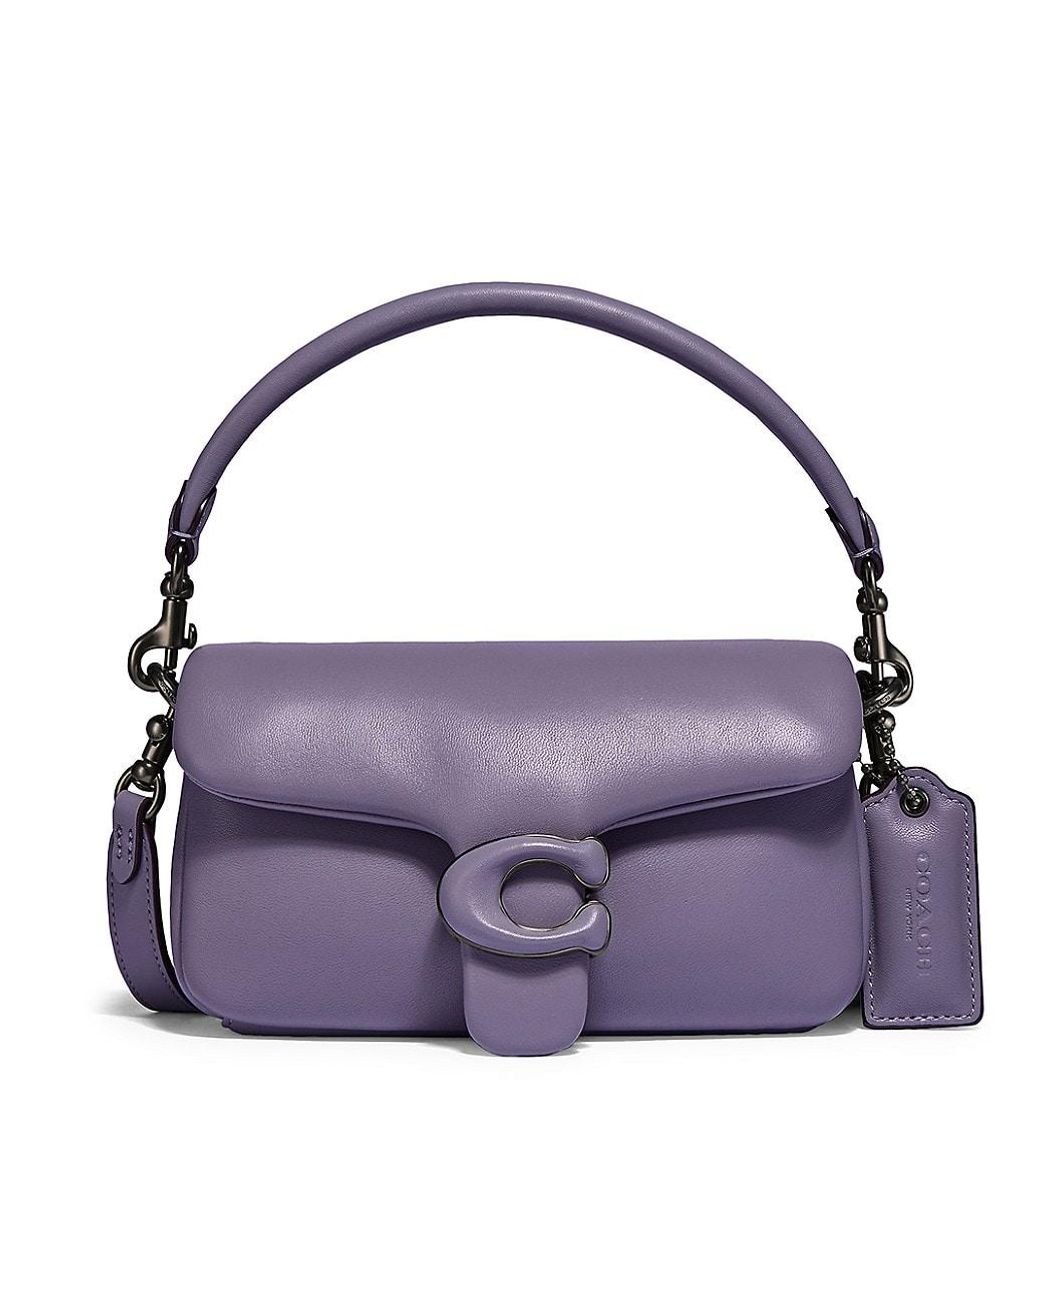 Share 76+ coach purple bags - in.cdgdbentre